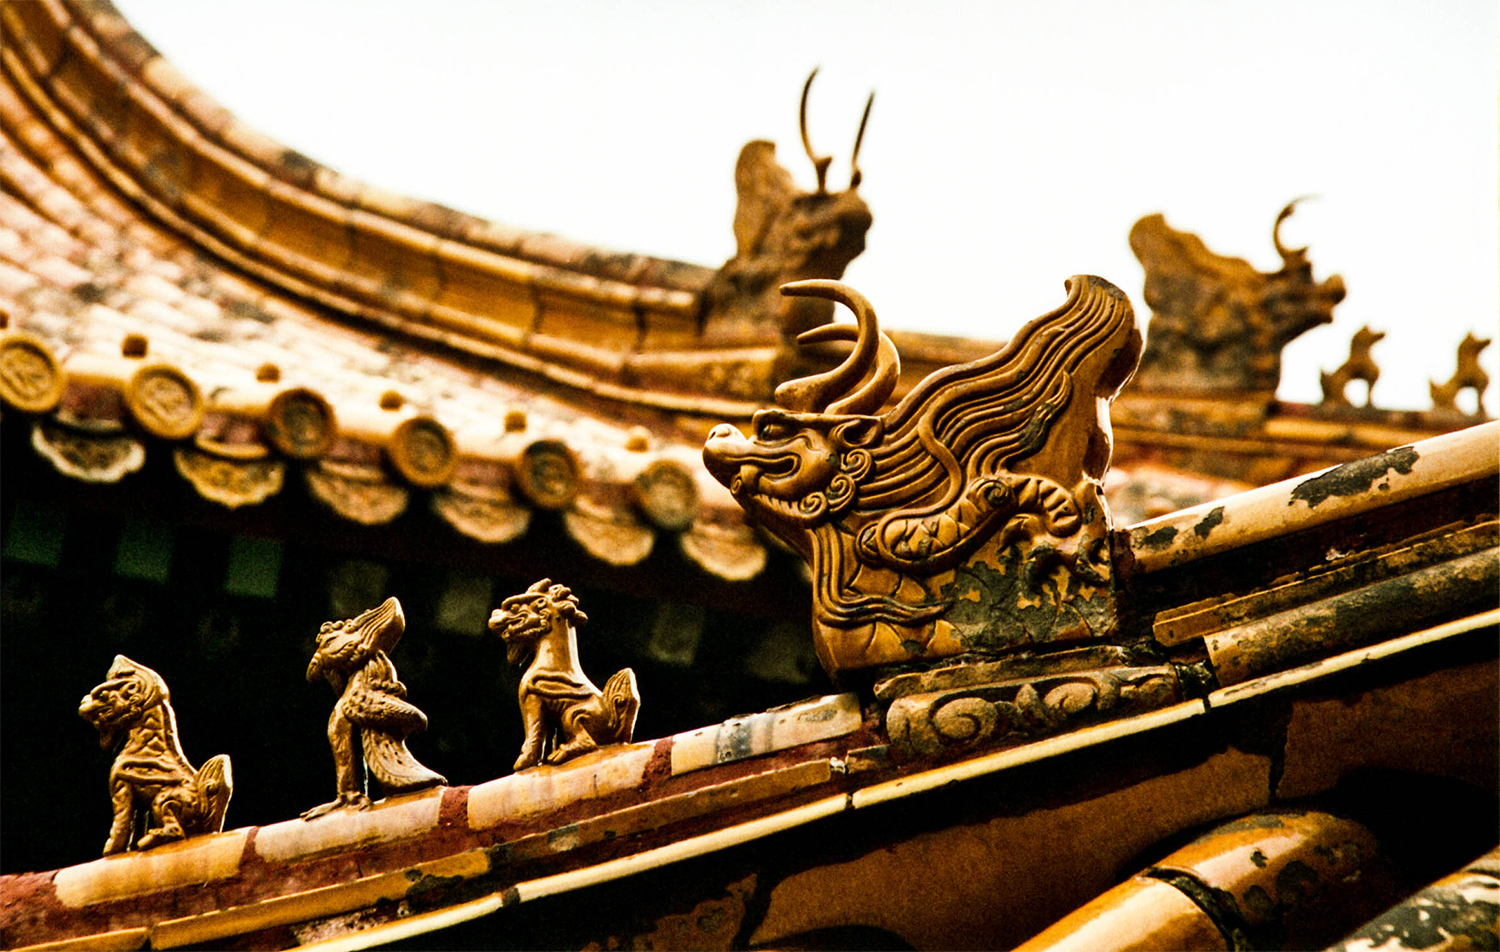 <p>Imperial Chinese architecture frequently featured porcelain figures arranged in rows atop the gabled roofs. The large dragon is said to represent imperial power, driving away a menagerie of evil spirits. These were shot in the Forbidden City.</p>